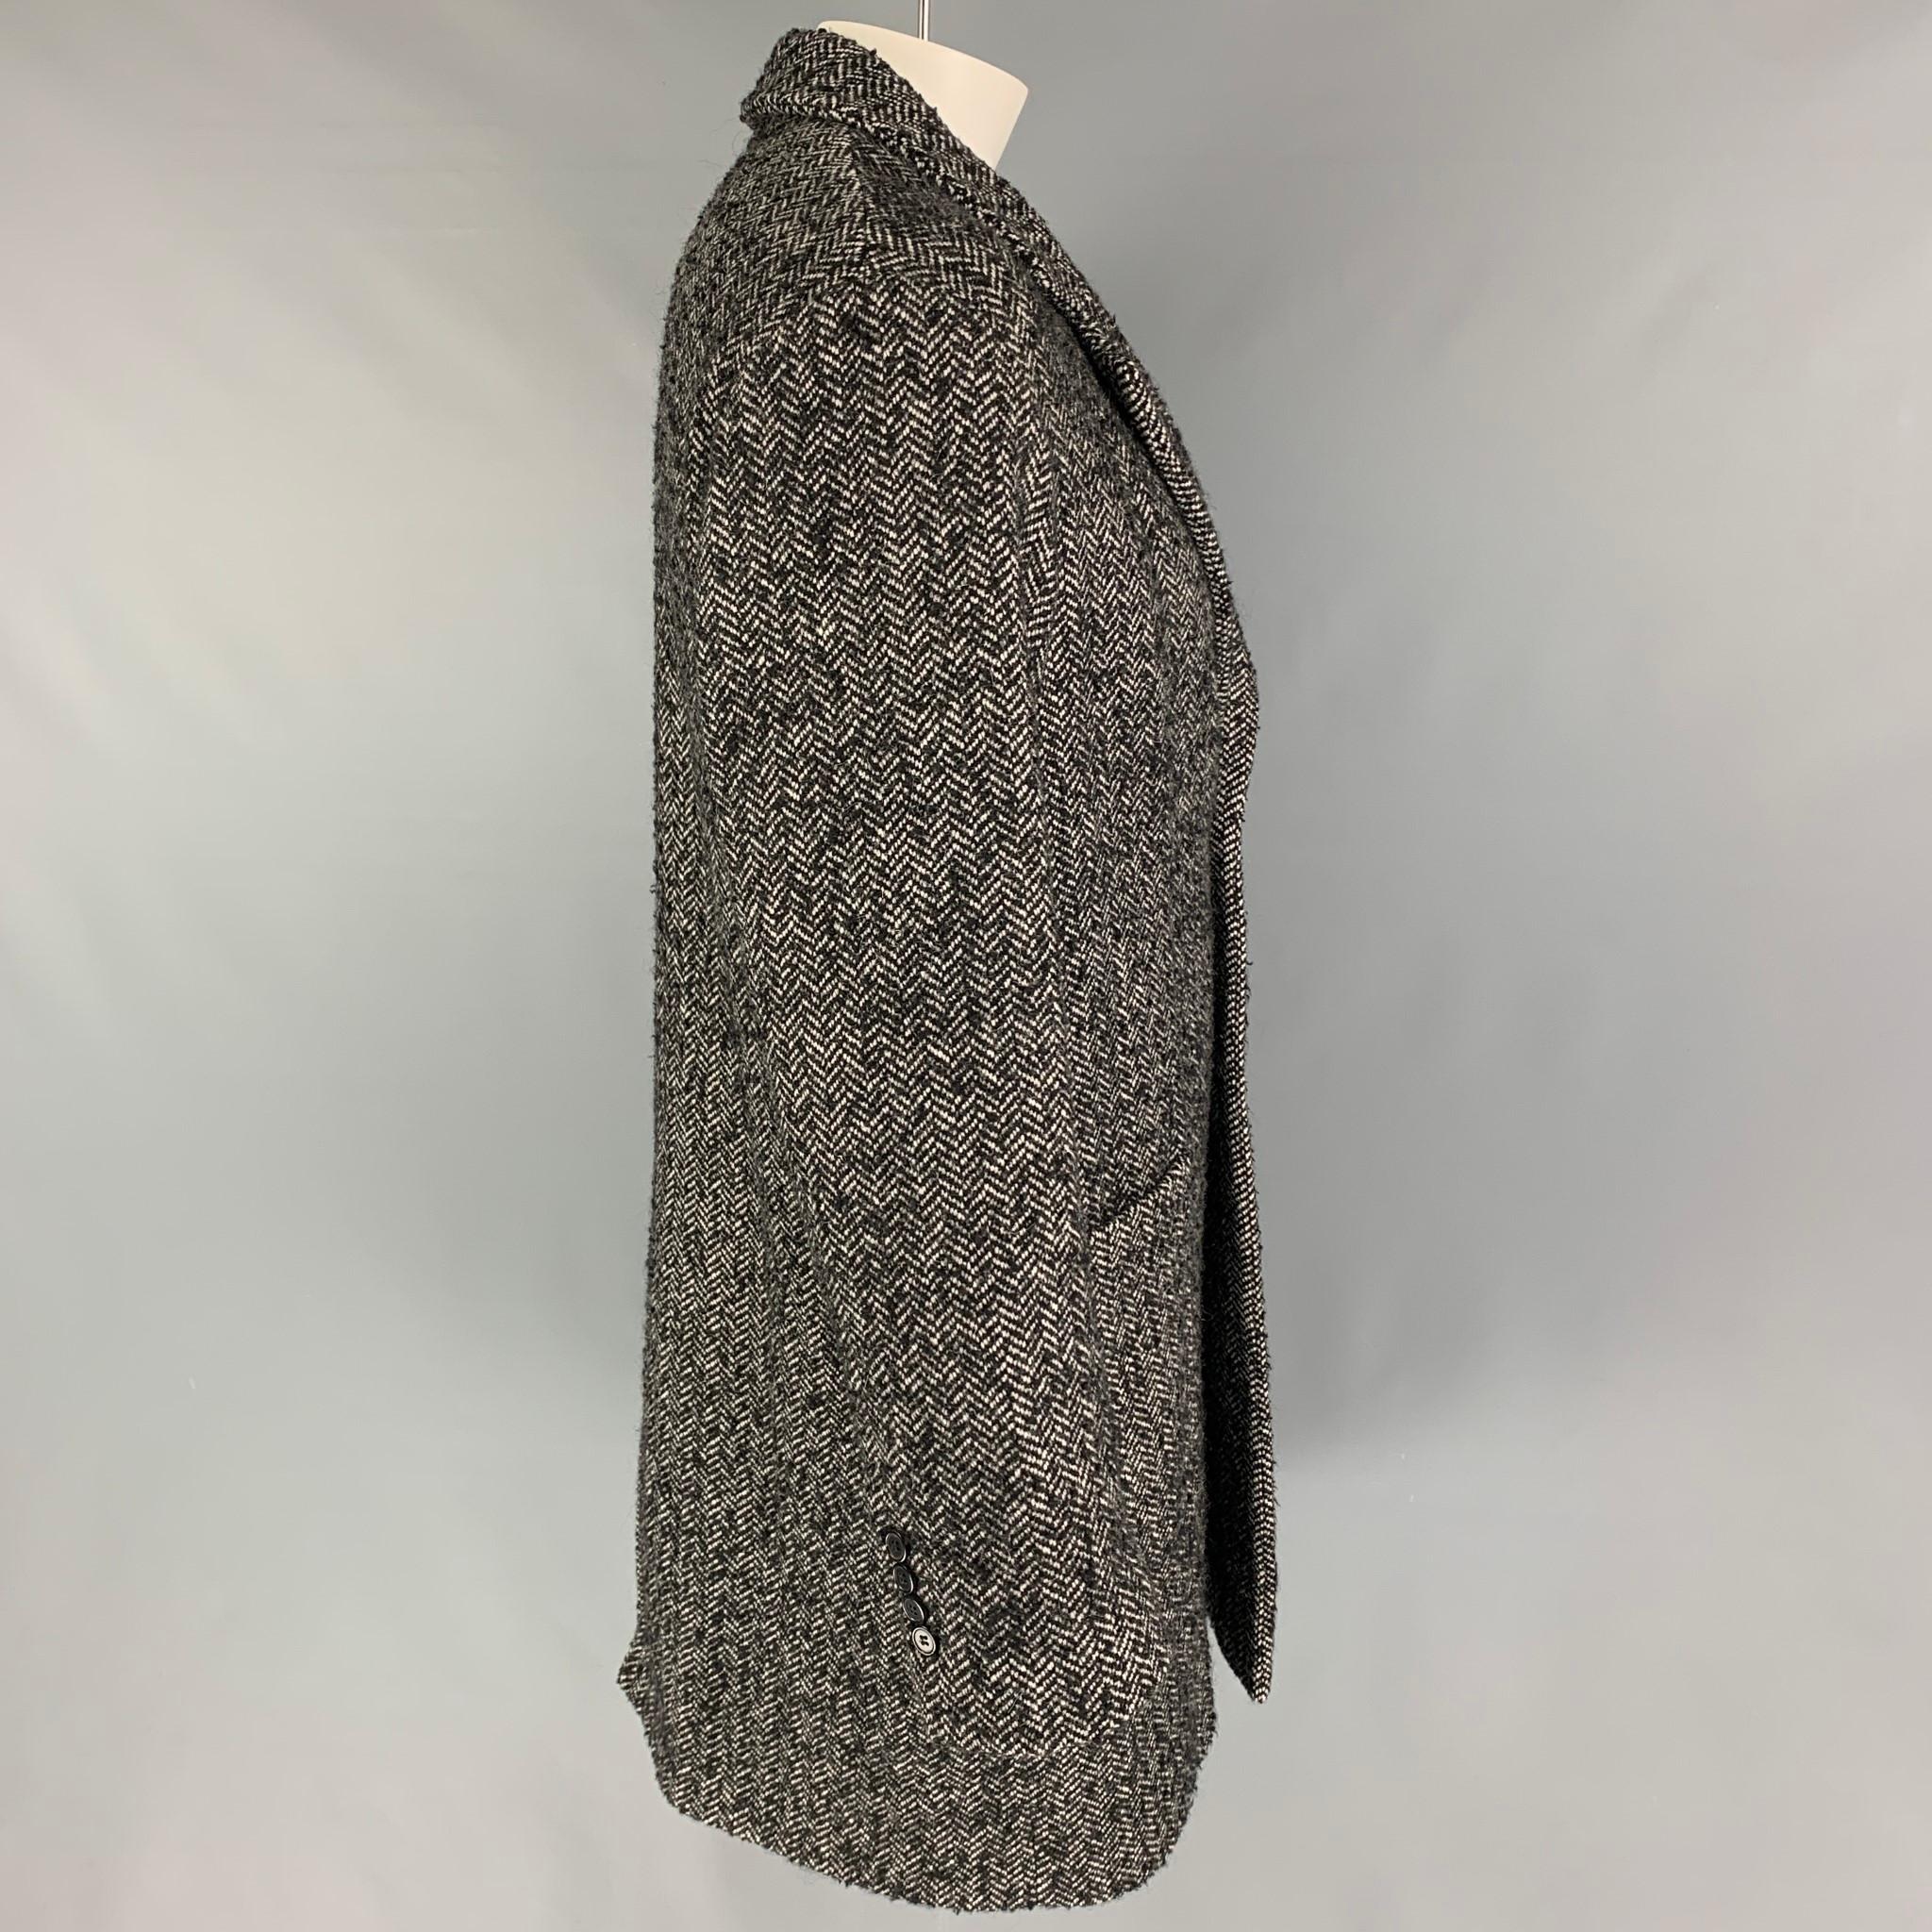 AMI by ALEXANDRE MATIUSSI coat comes in a black & white herringbone wool blend with a full liner featuring a notch lapel, loose fit, patch pockets, single back vent, and a buttoned closure.

Very Good Pre-Owned Condition.
Marked: